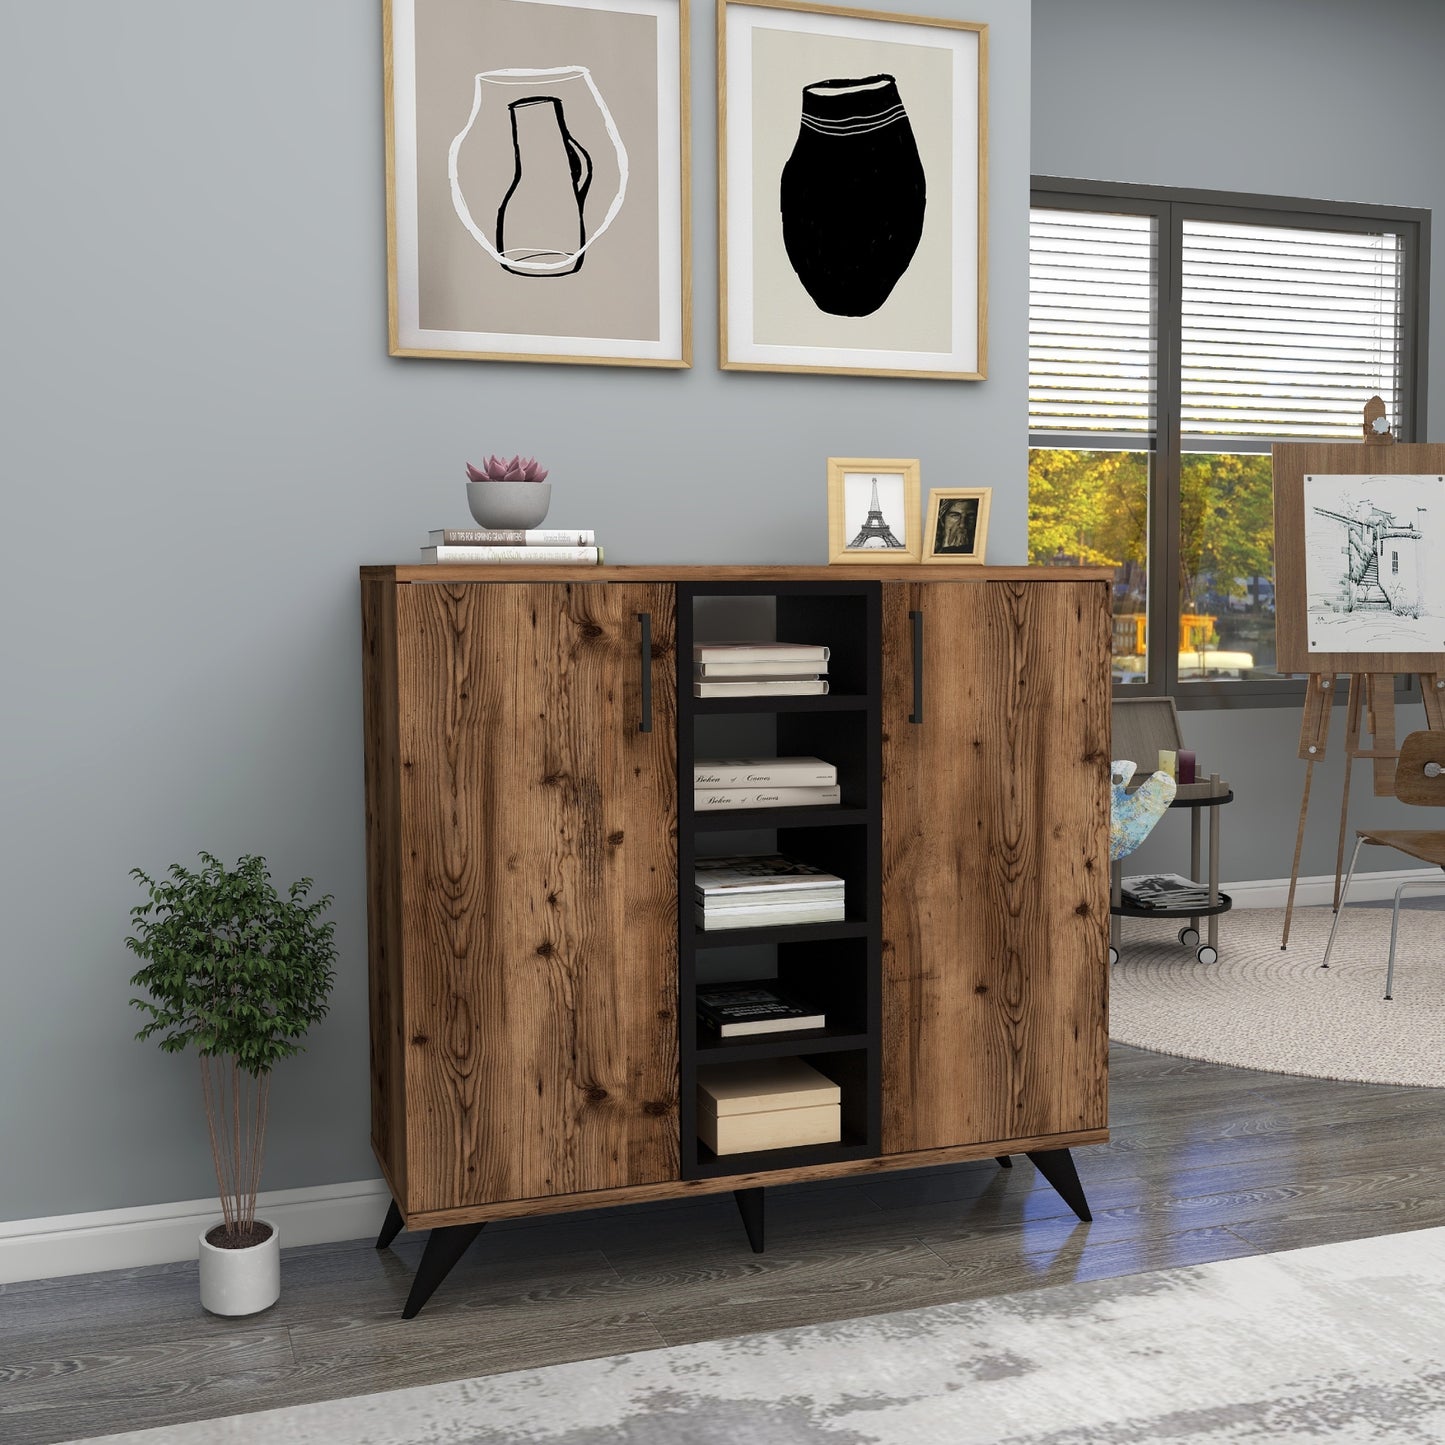 Leander Bookcase with Cabinets and Shelves